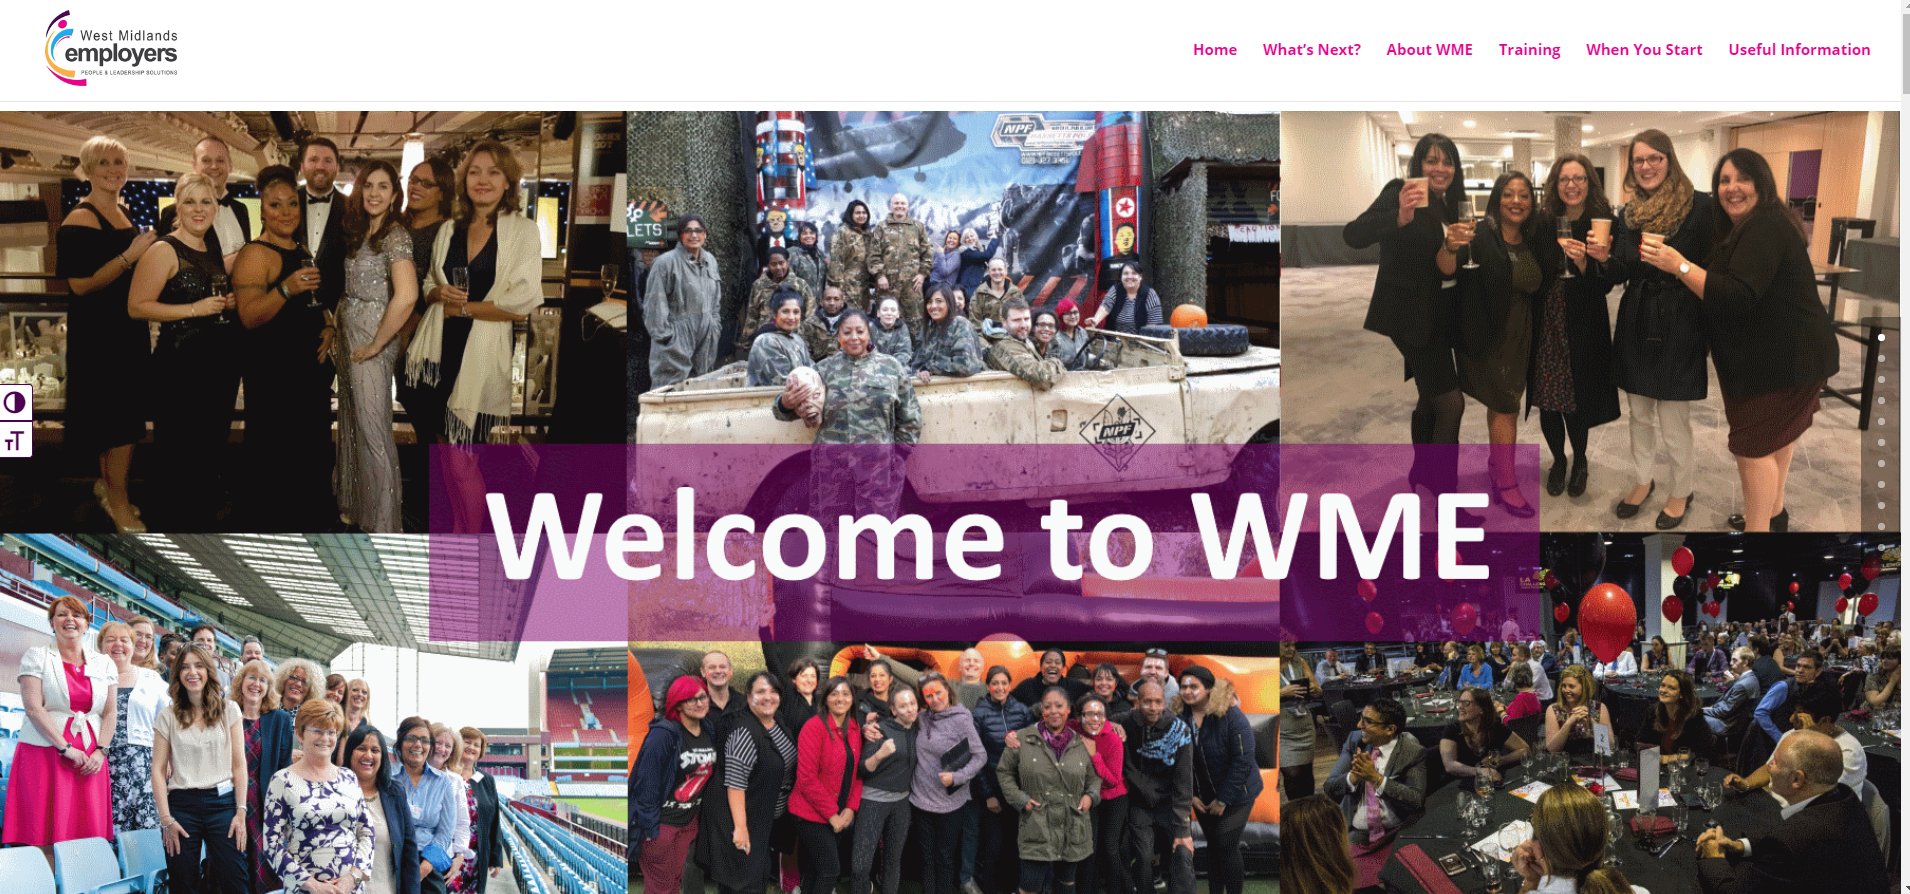 WME Onboarding